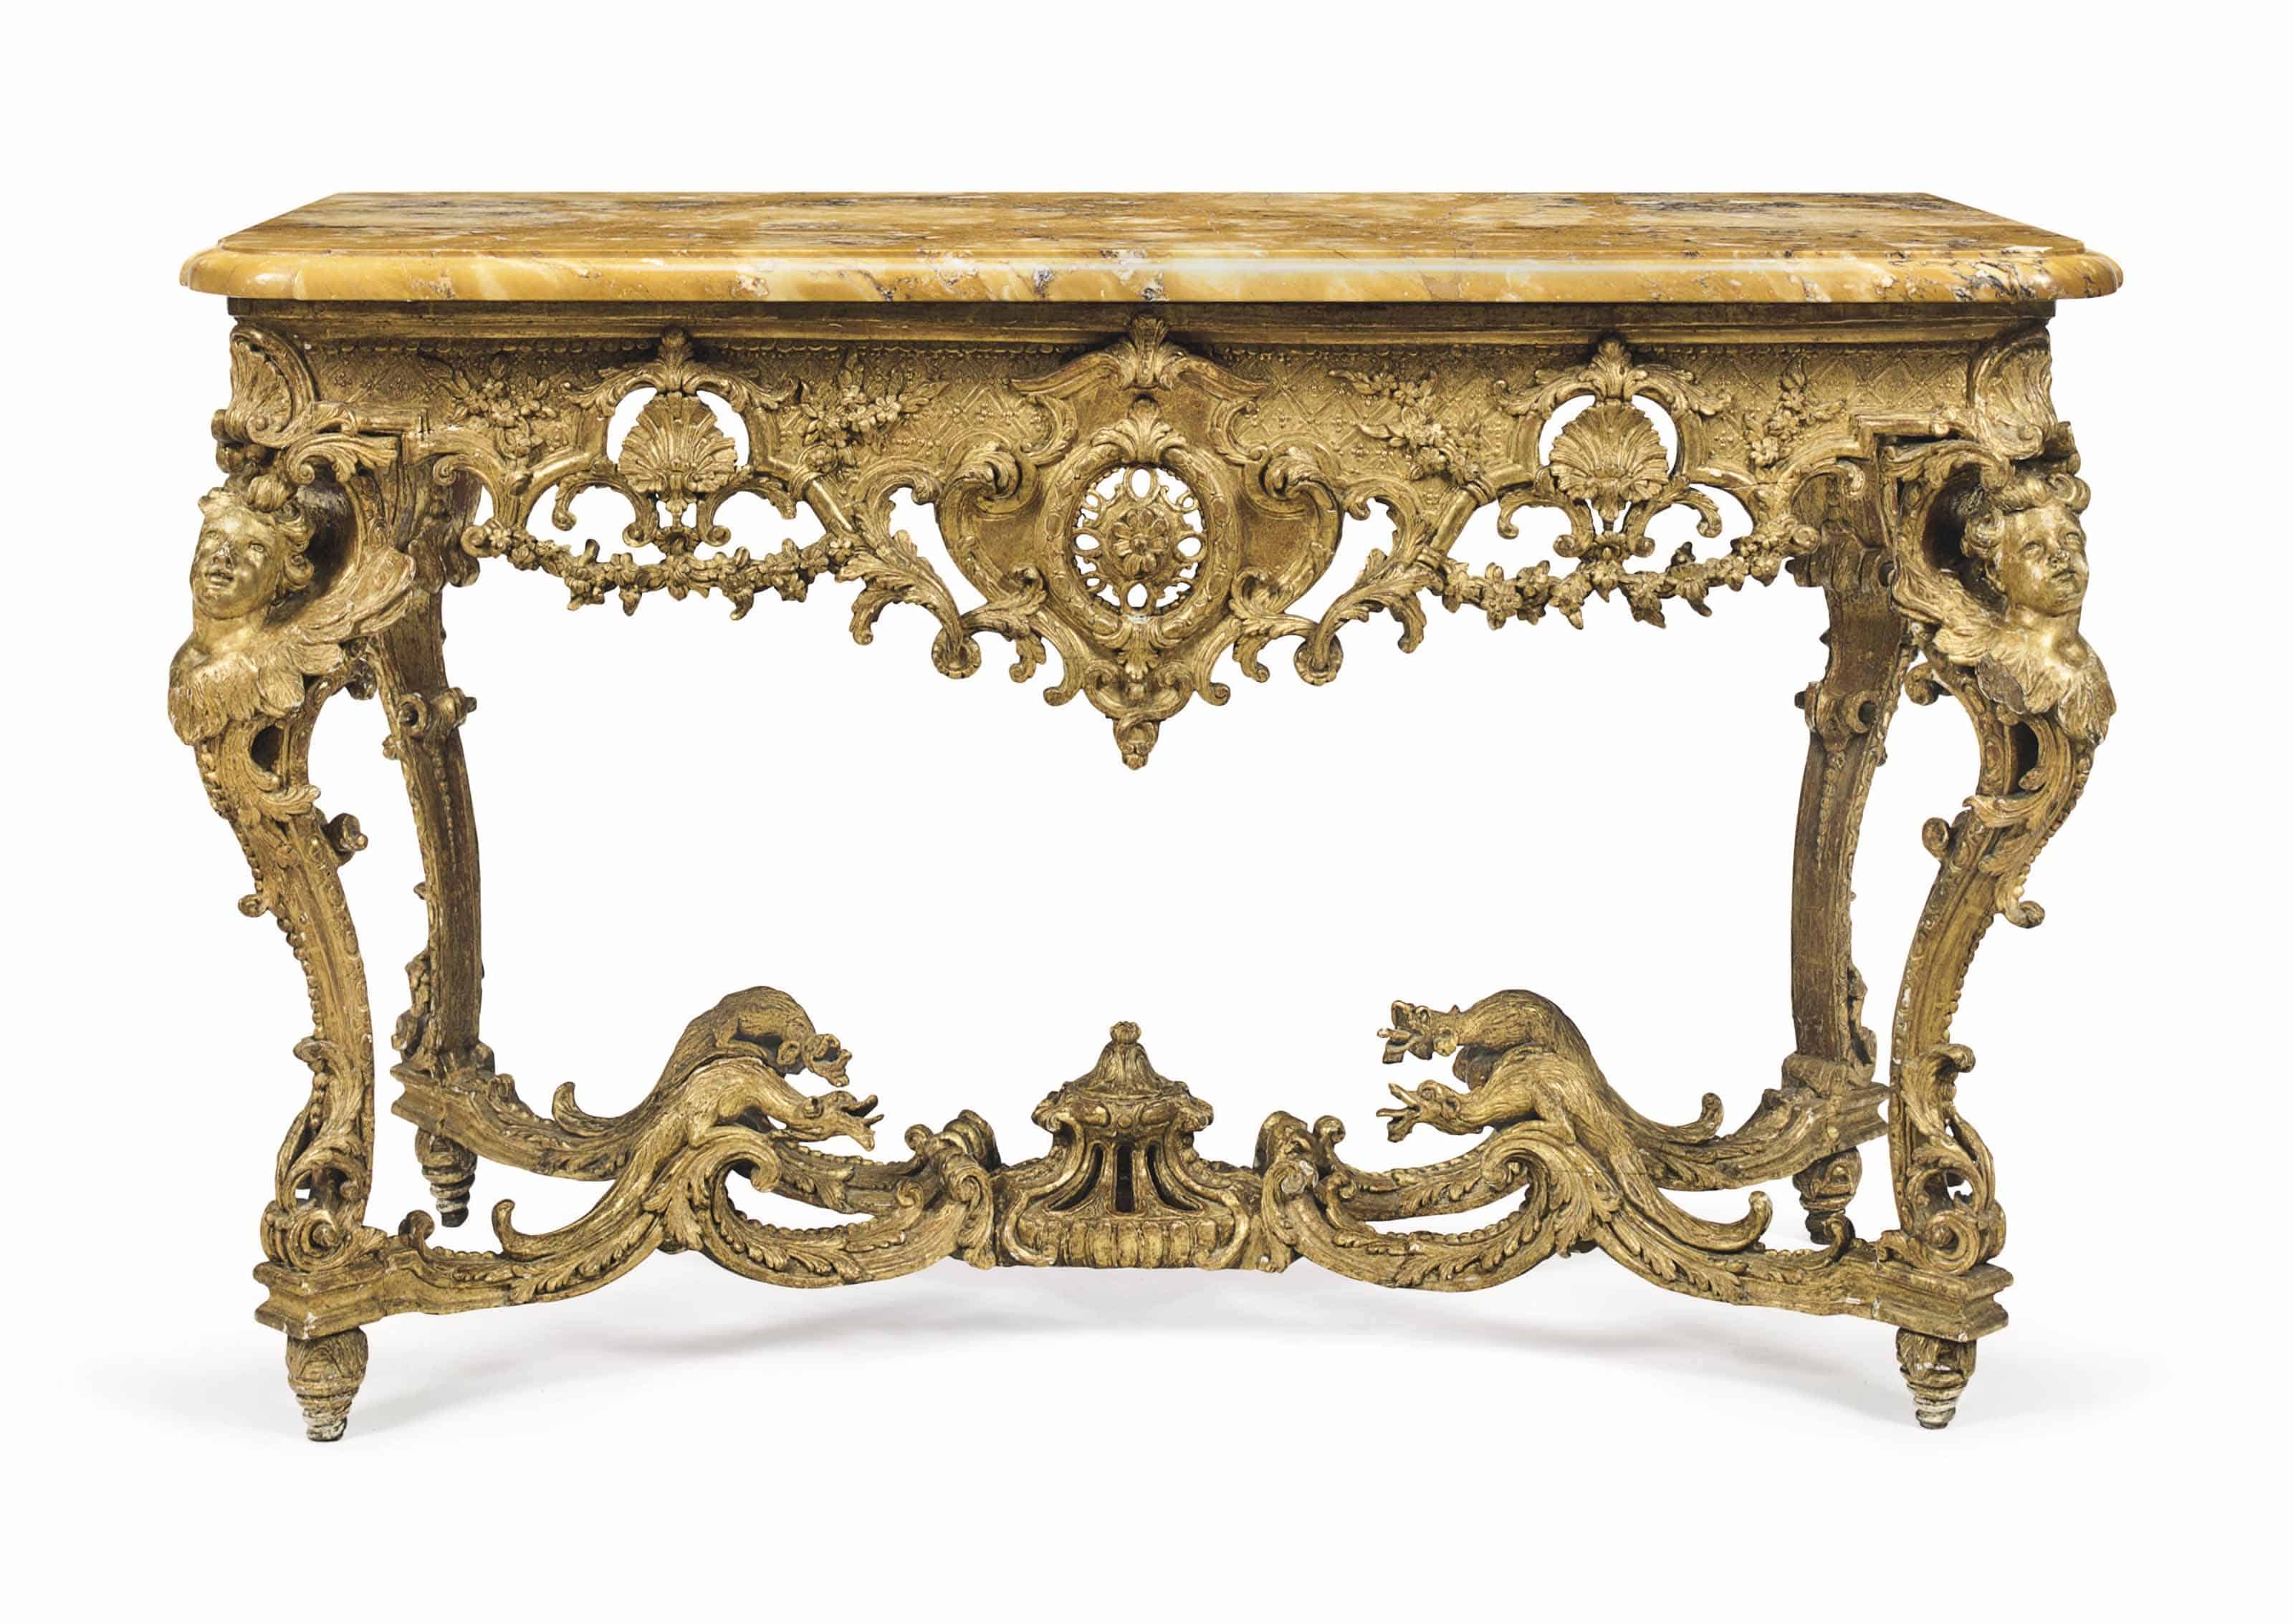 Louis XIV Design History | Furniture Fit For A King | Styylish